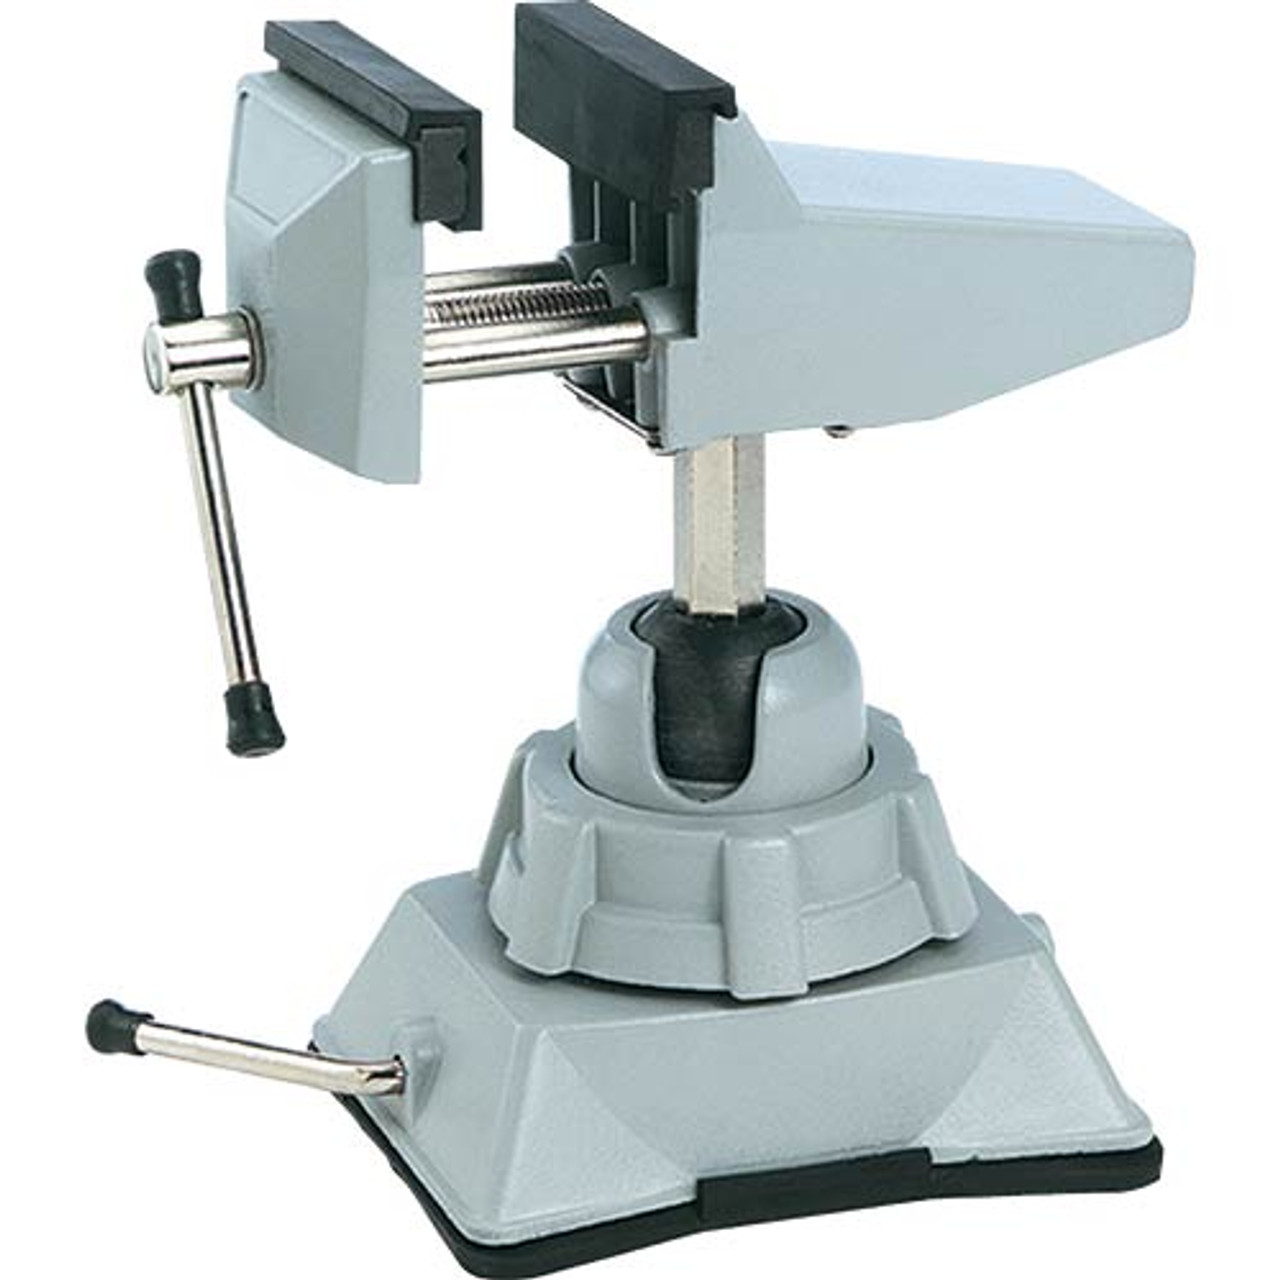 Woodstock Steelex Multi-Positioning Hobby Vise-Suction D2482